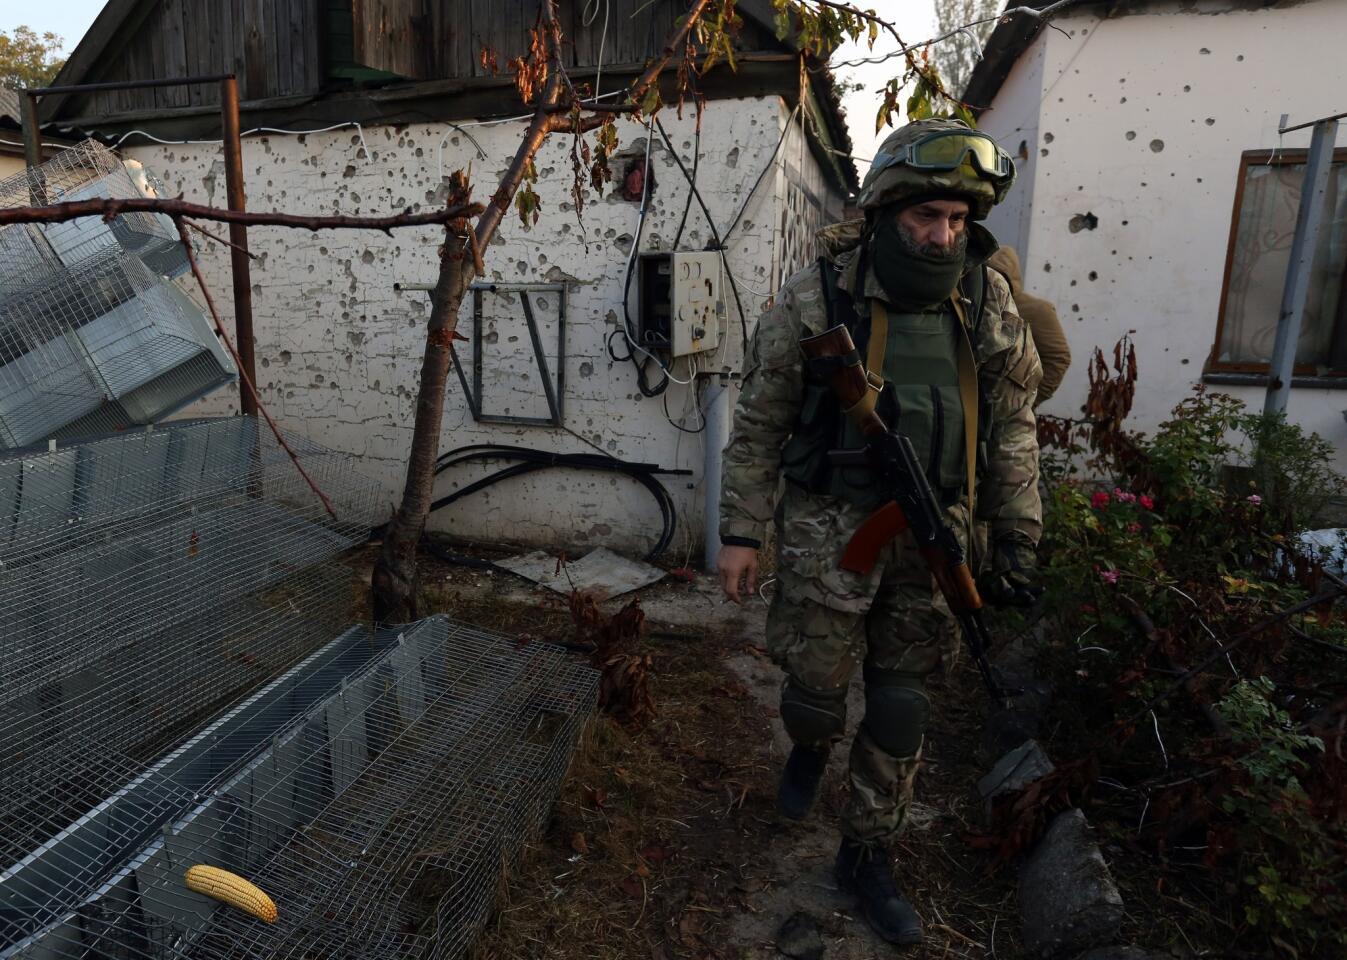 Militia fighter Asher-Jaseph Cherkassky walks in the yard of an abandoned house in the village of Peski on the outskirts of Donetsk, Ukraine.